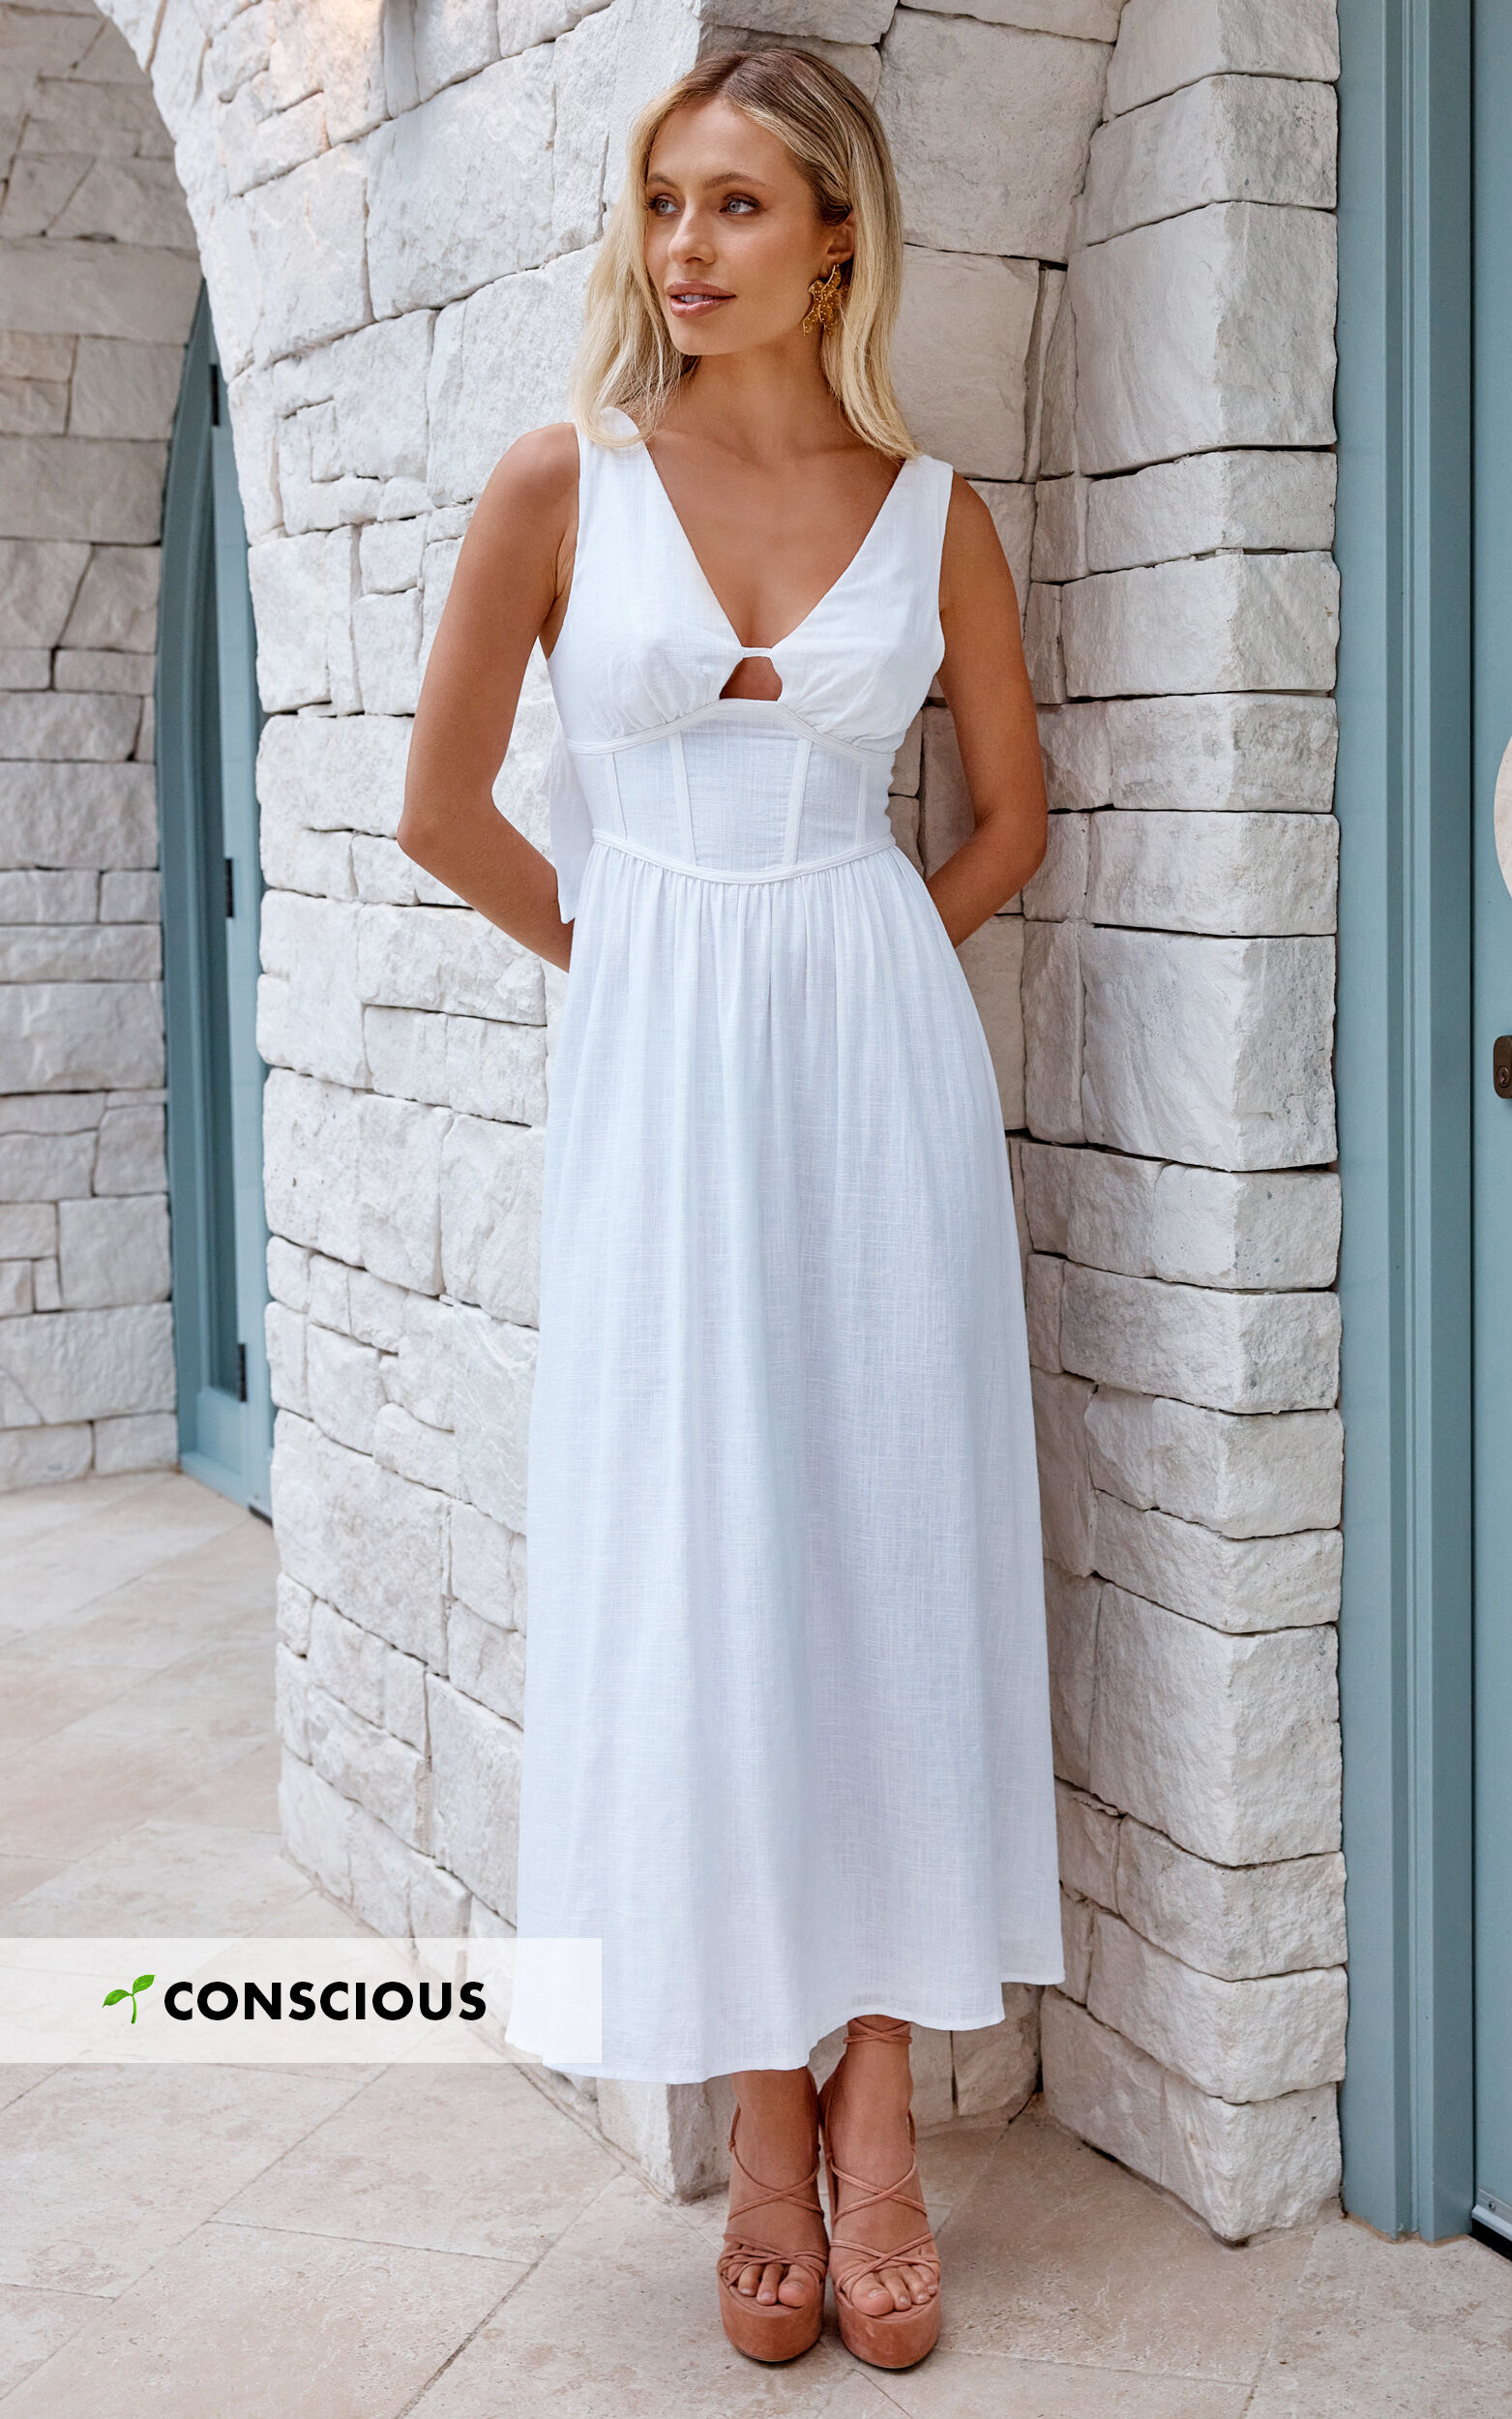 The Best Linen Dresses To Pack For Summer Travel To Europe - The Mom Edit